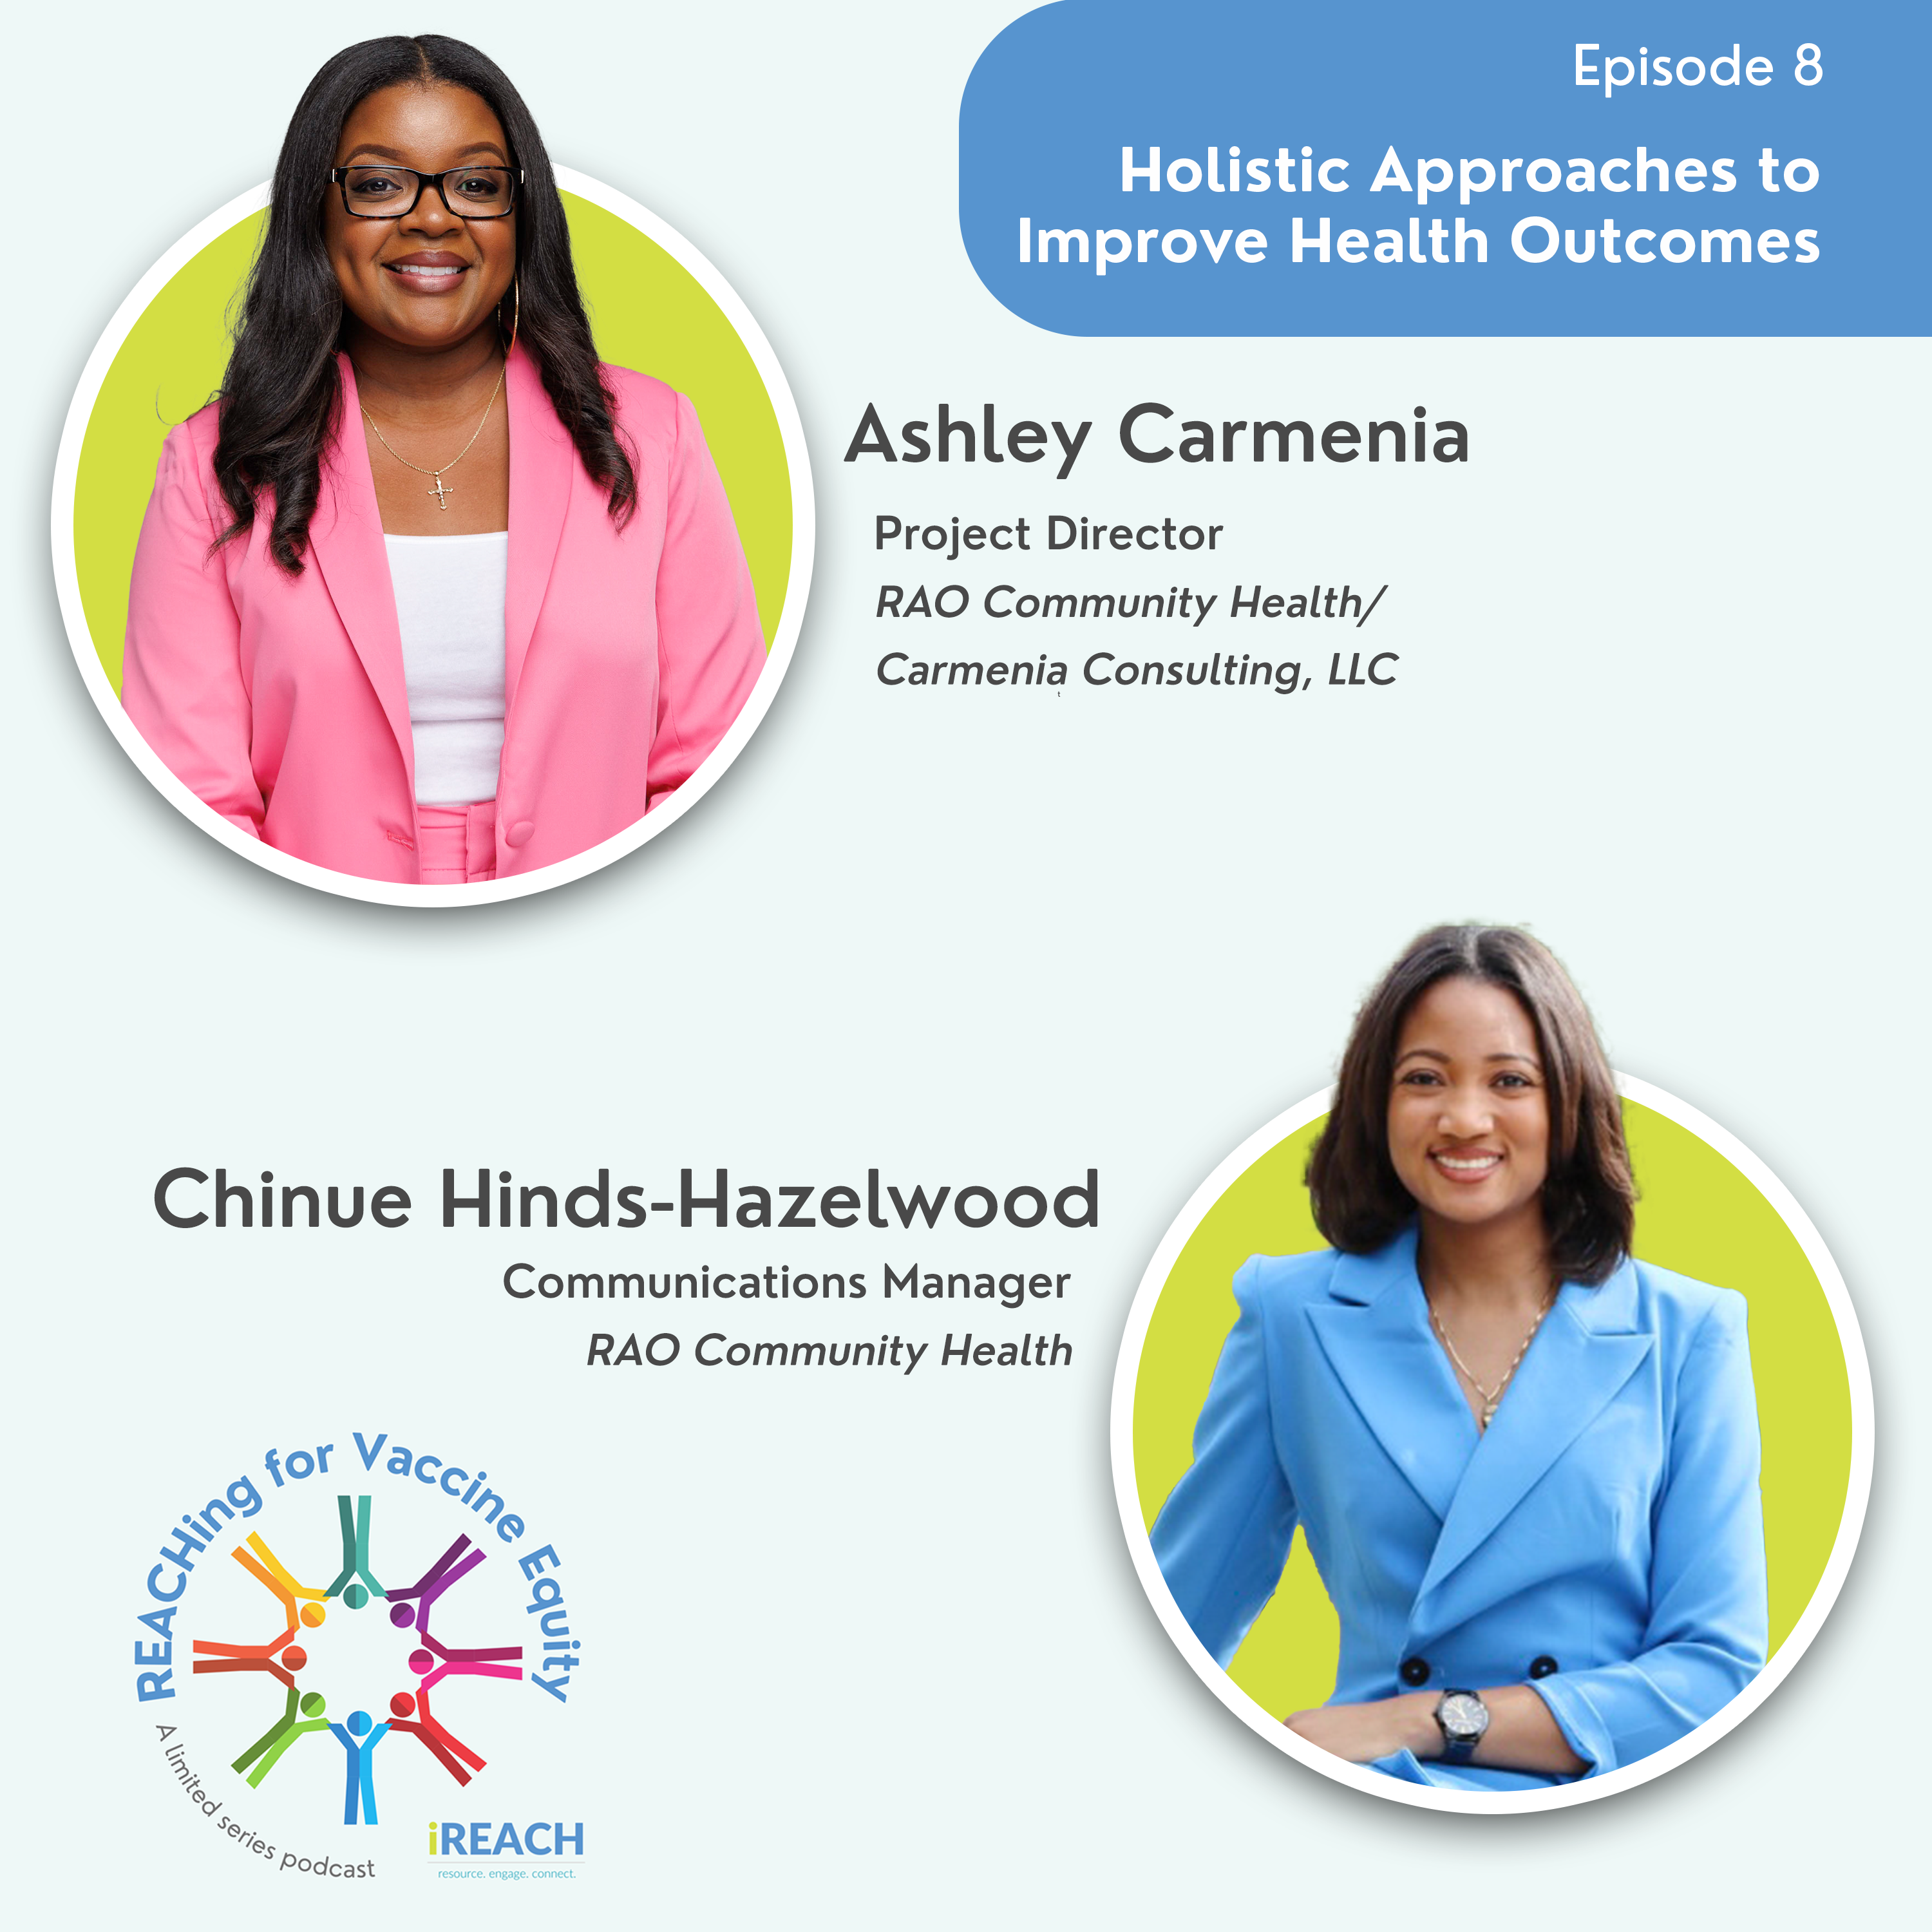 Webinar series returns with more inspiration for achieving health equity -  Big Cities Health Coalition